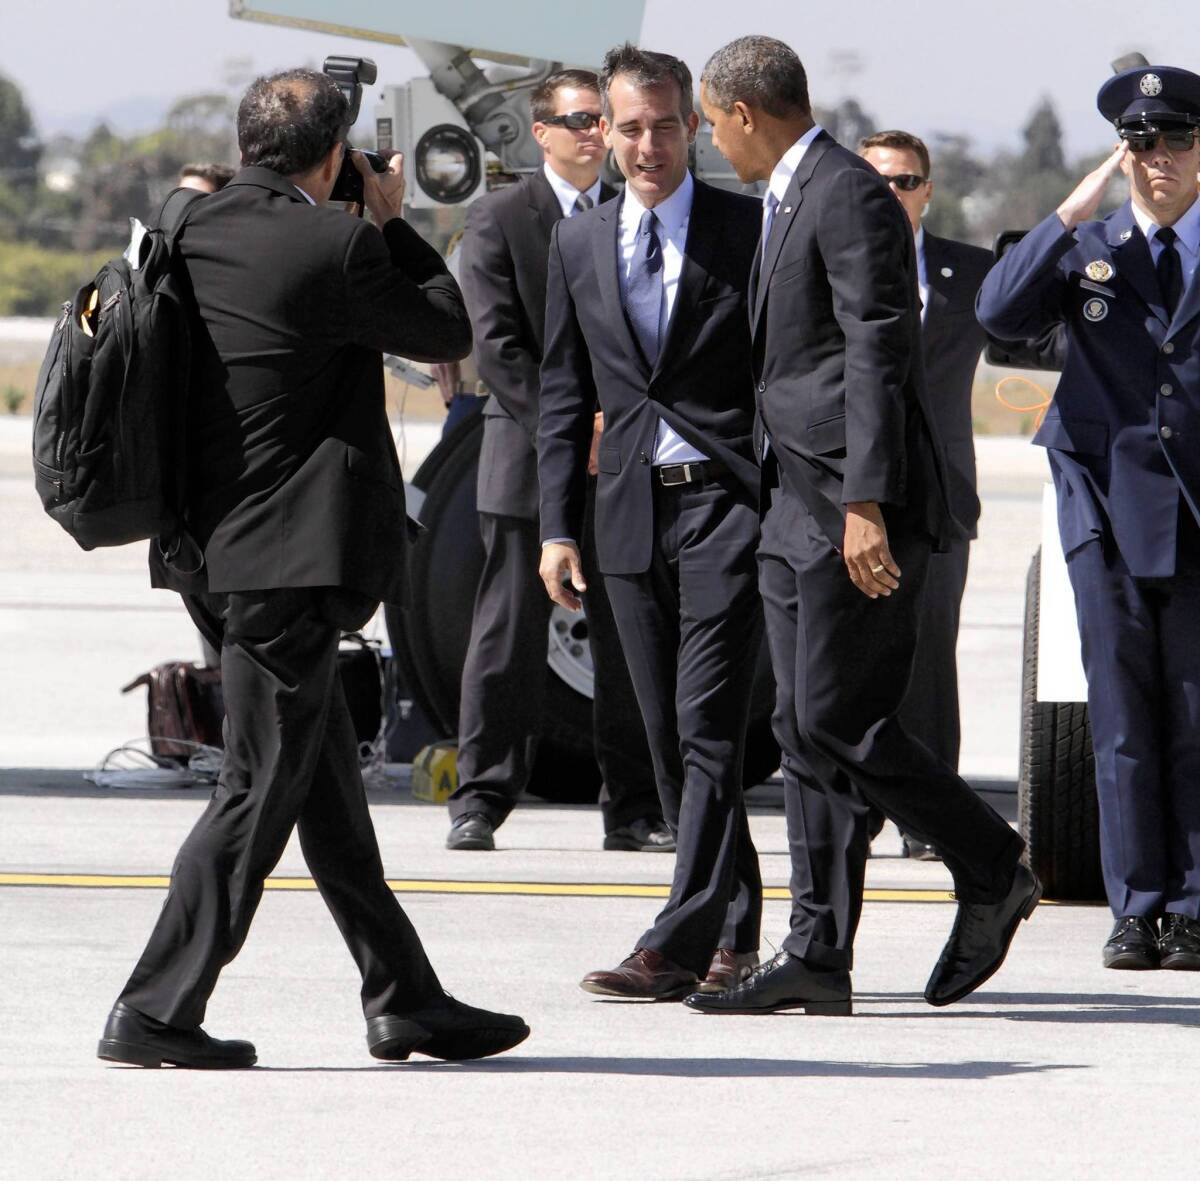 A White House photographer has unobstructed access to President Obama as he is greeted by Los Angeles Mayor Eric Garcetti at Los Angeles International Airport in August.